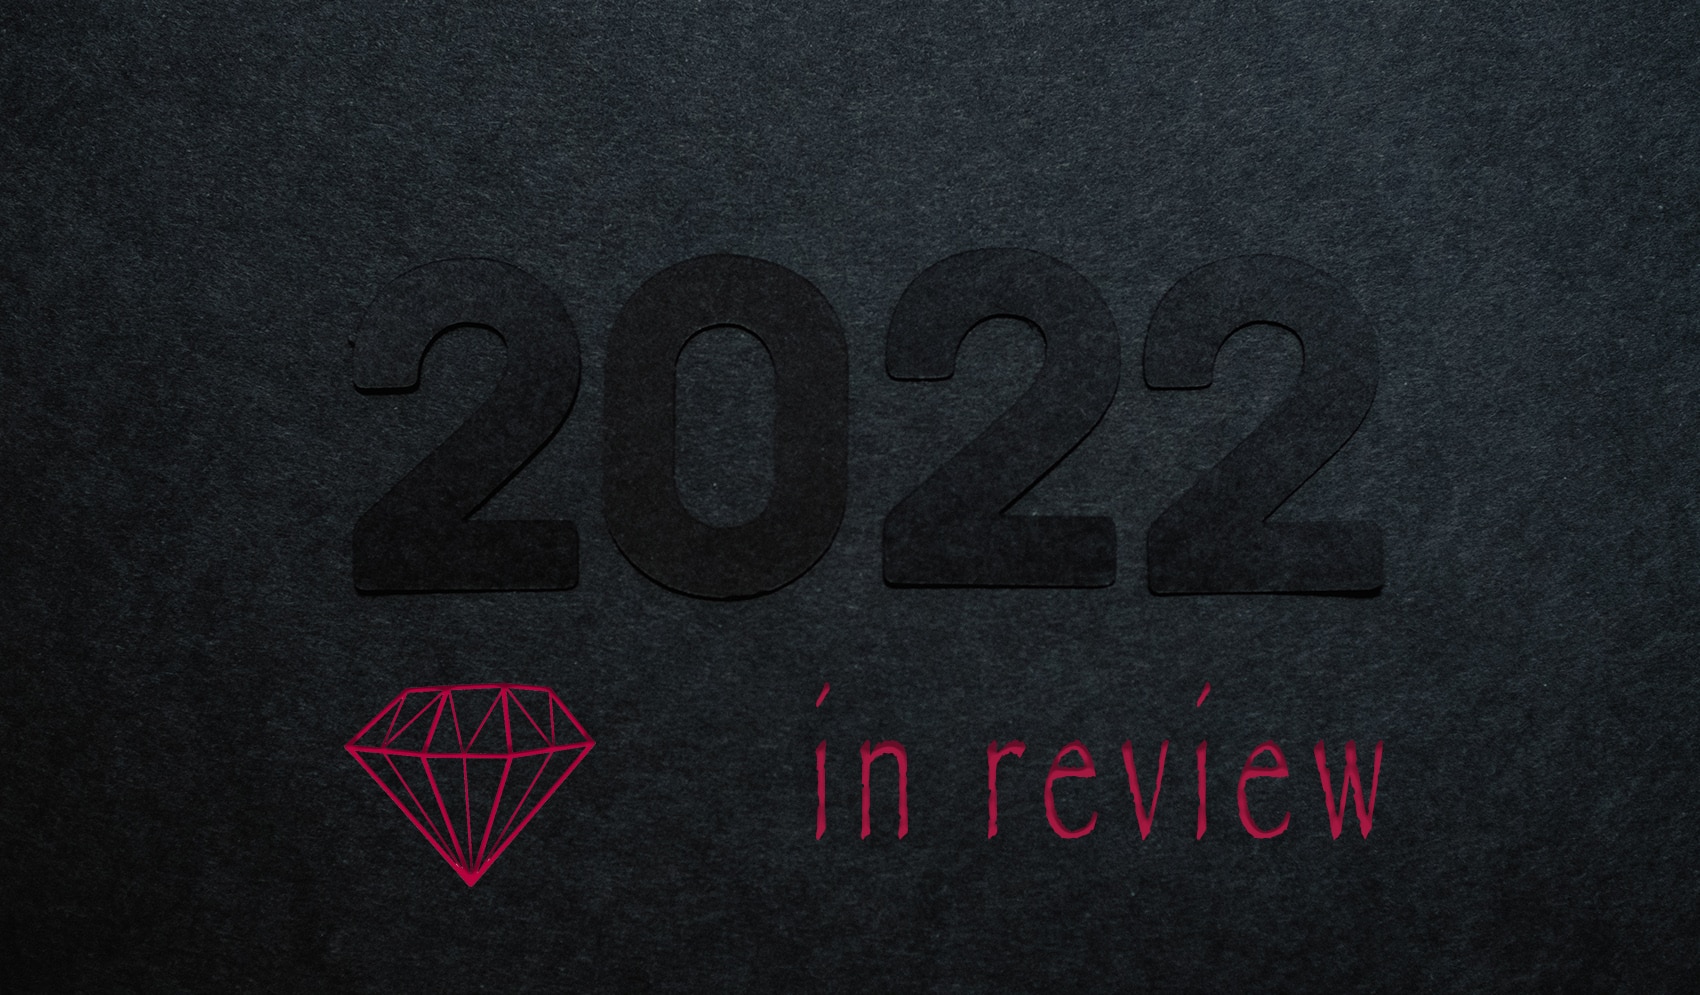 2022 IN REVIEW